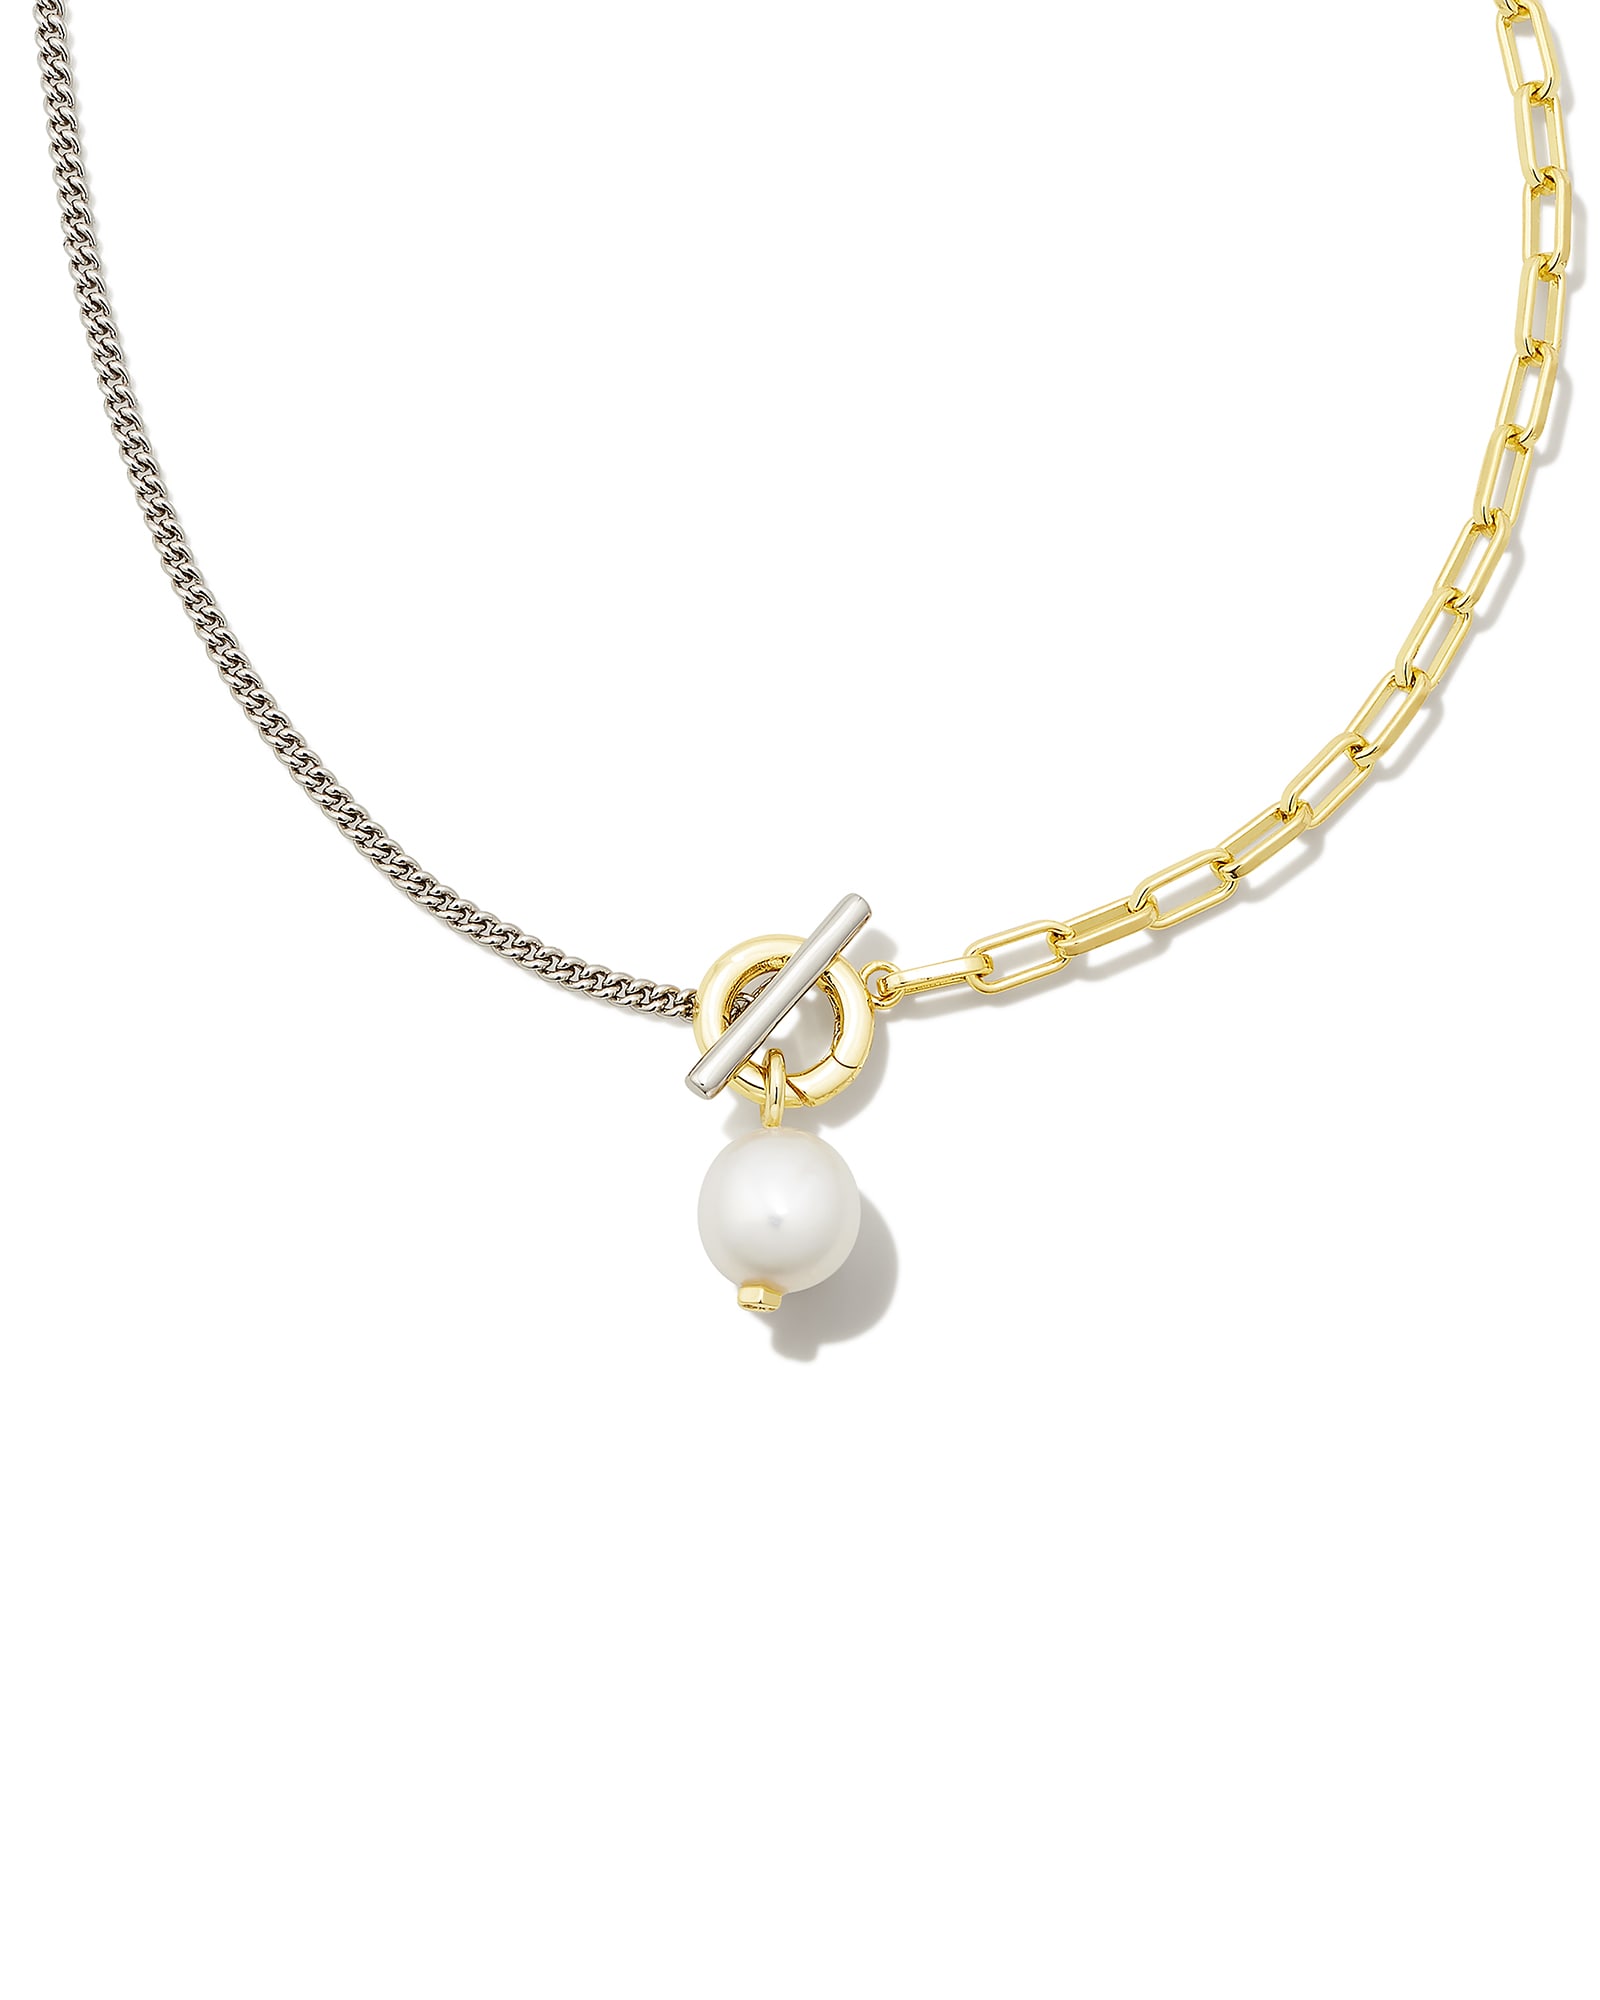 Leighton Convertible Mixed Metal Pearl Chain Necklace in White Pearl | Kendra Scott